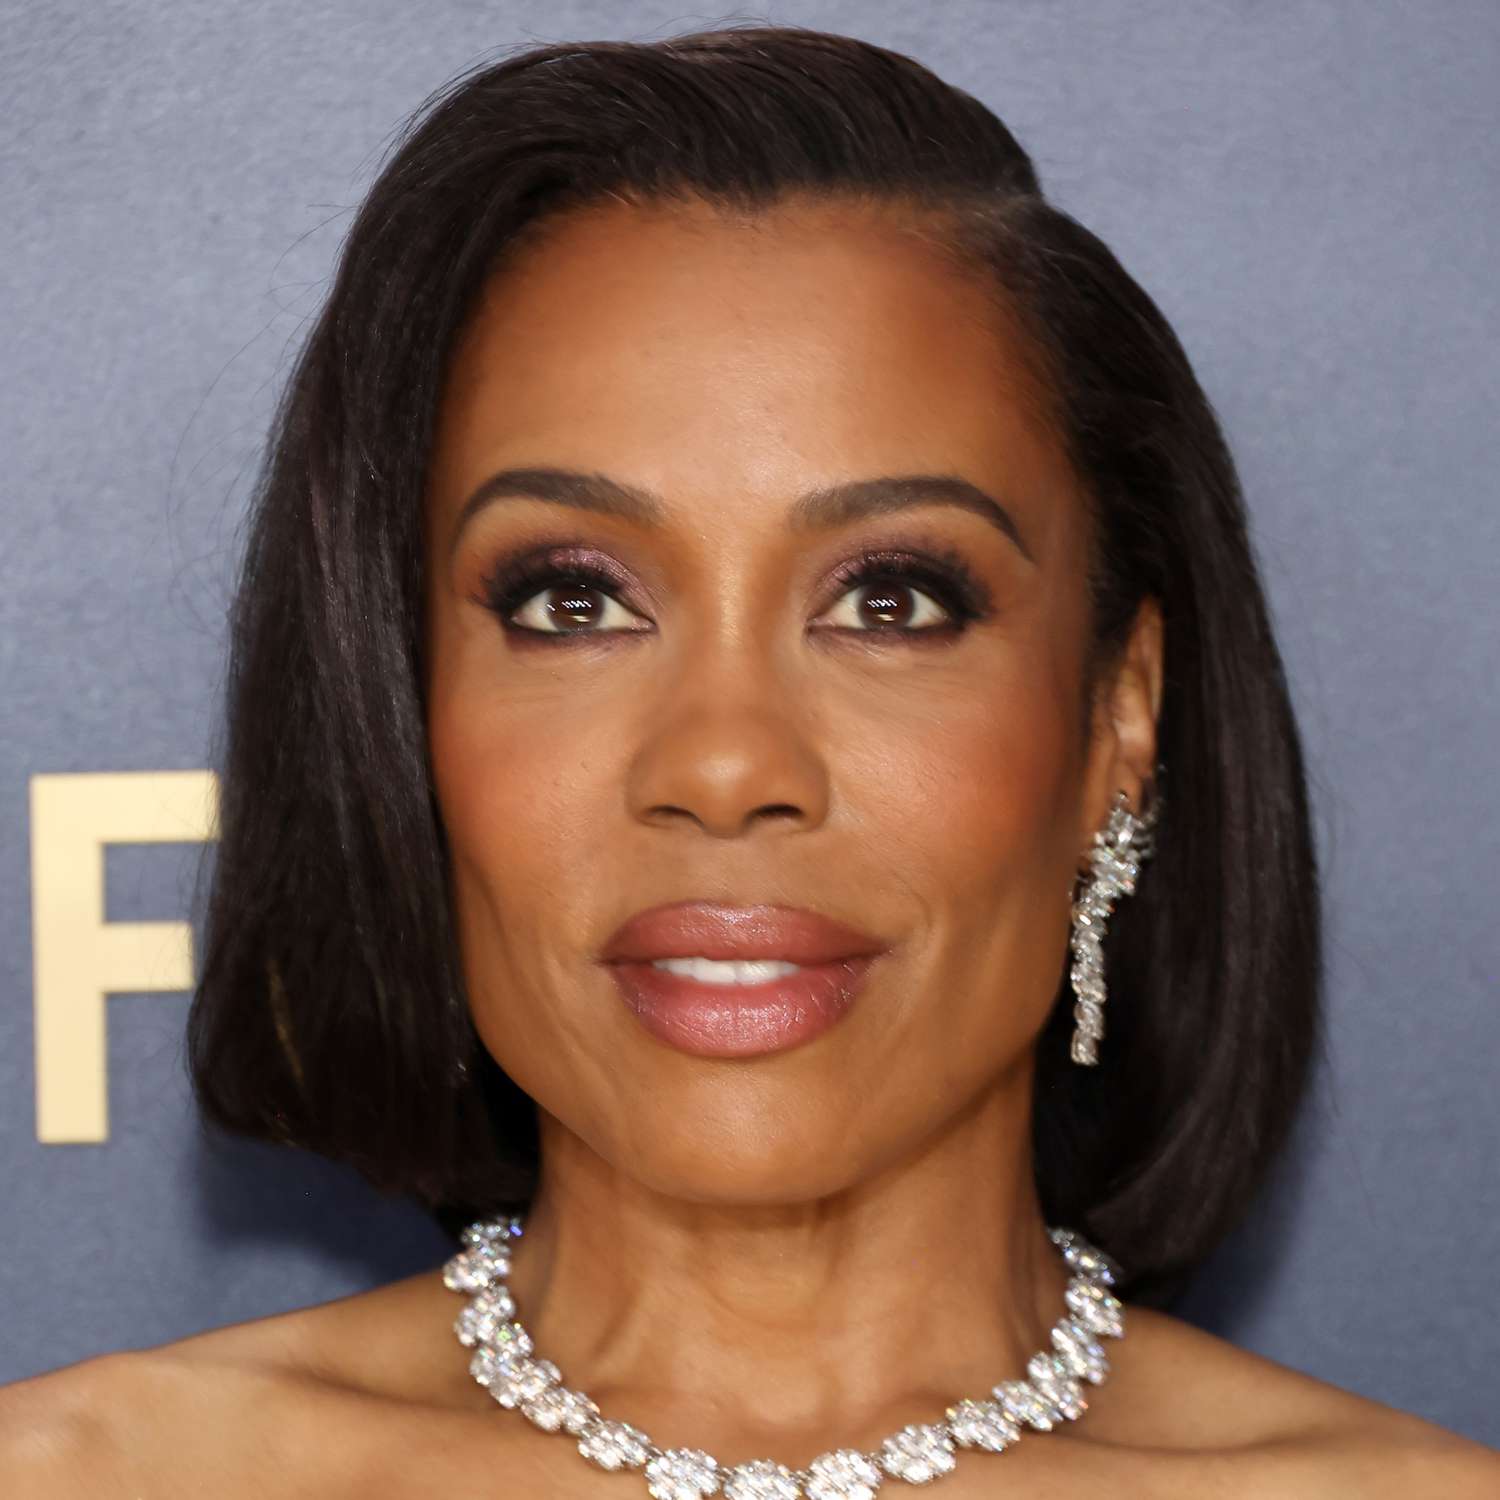 Karen Pittman attends the SAG Awards with an over directed, side-parted bob